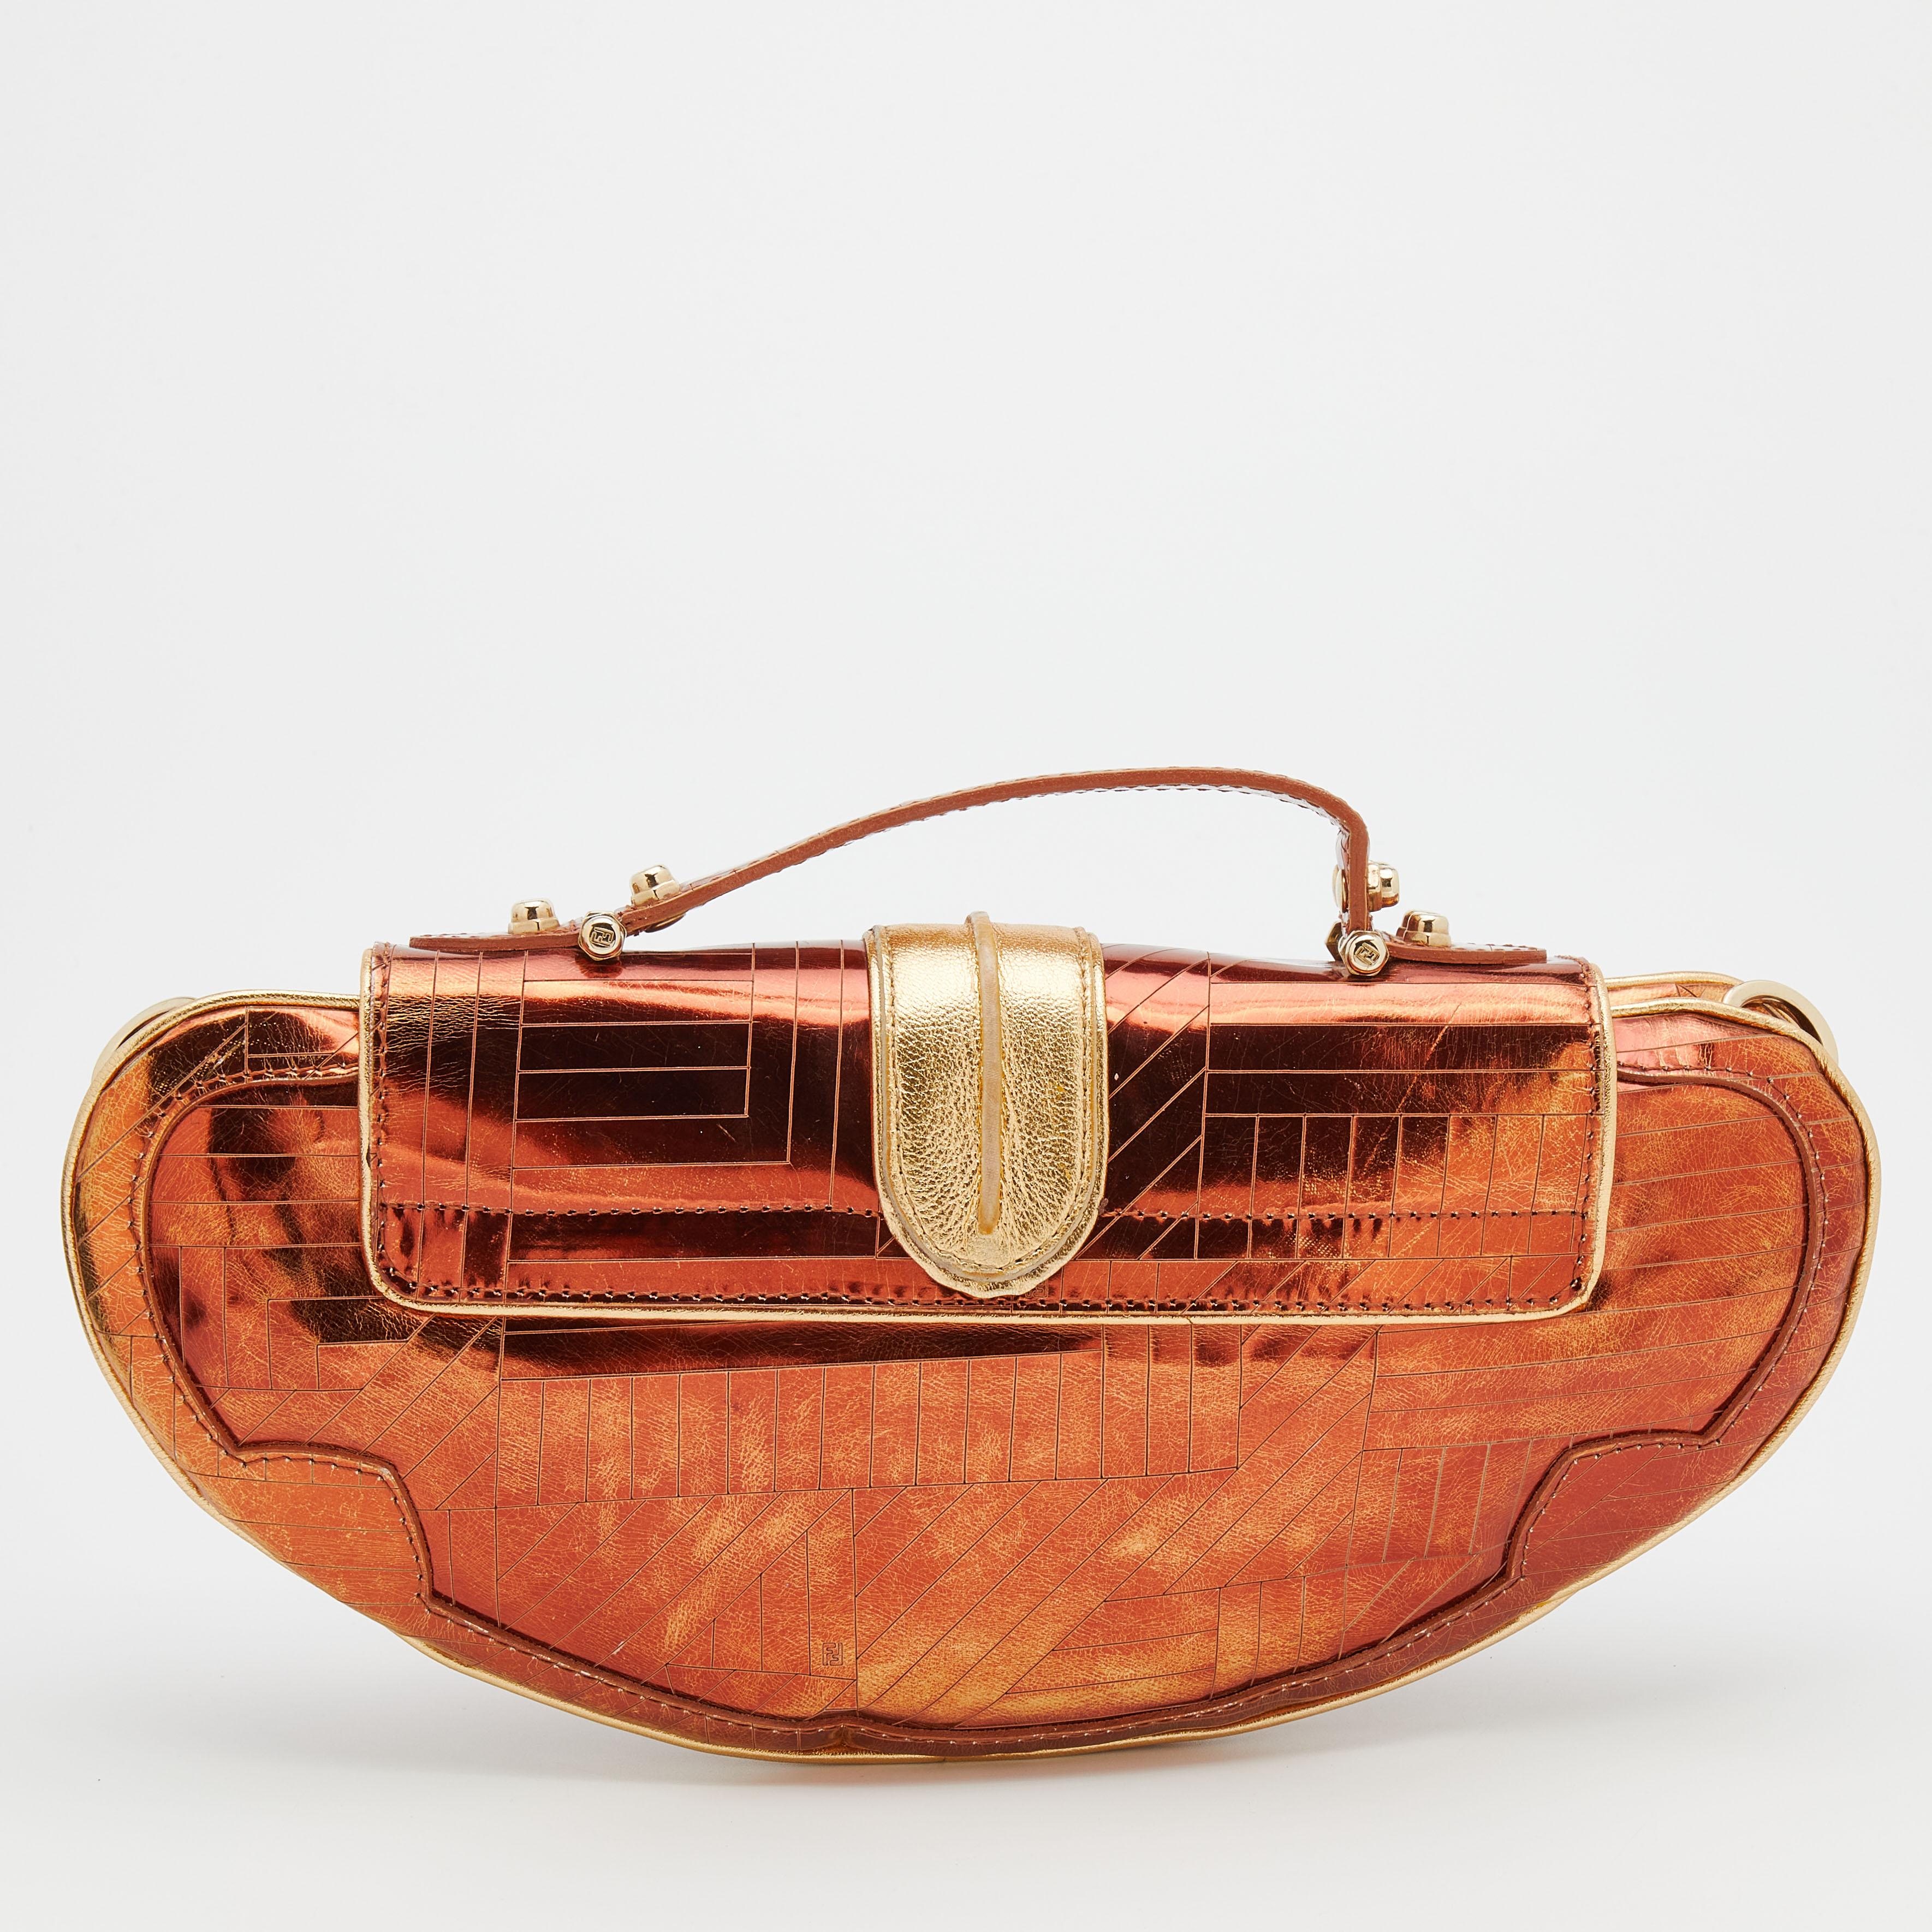 A half-moon shape, short top handle, and shoulder strap make this Fendi bag compact and easy to carry. It is crafted in leather and embellished with mirror details.

Includes: Original Dustbag